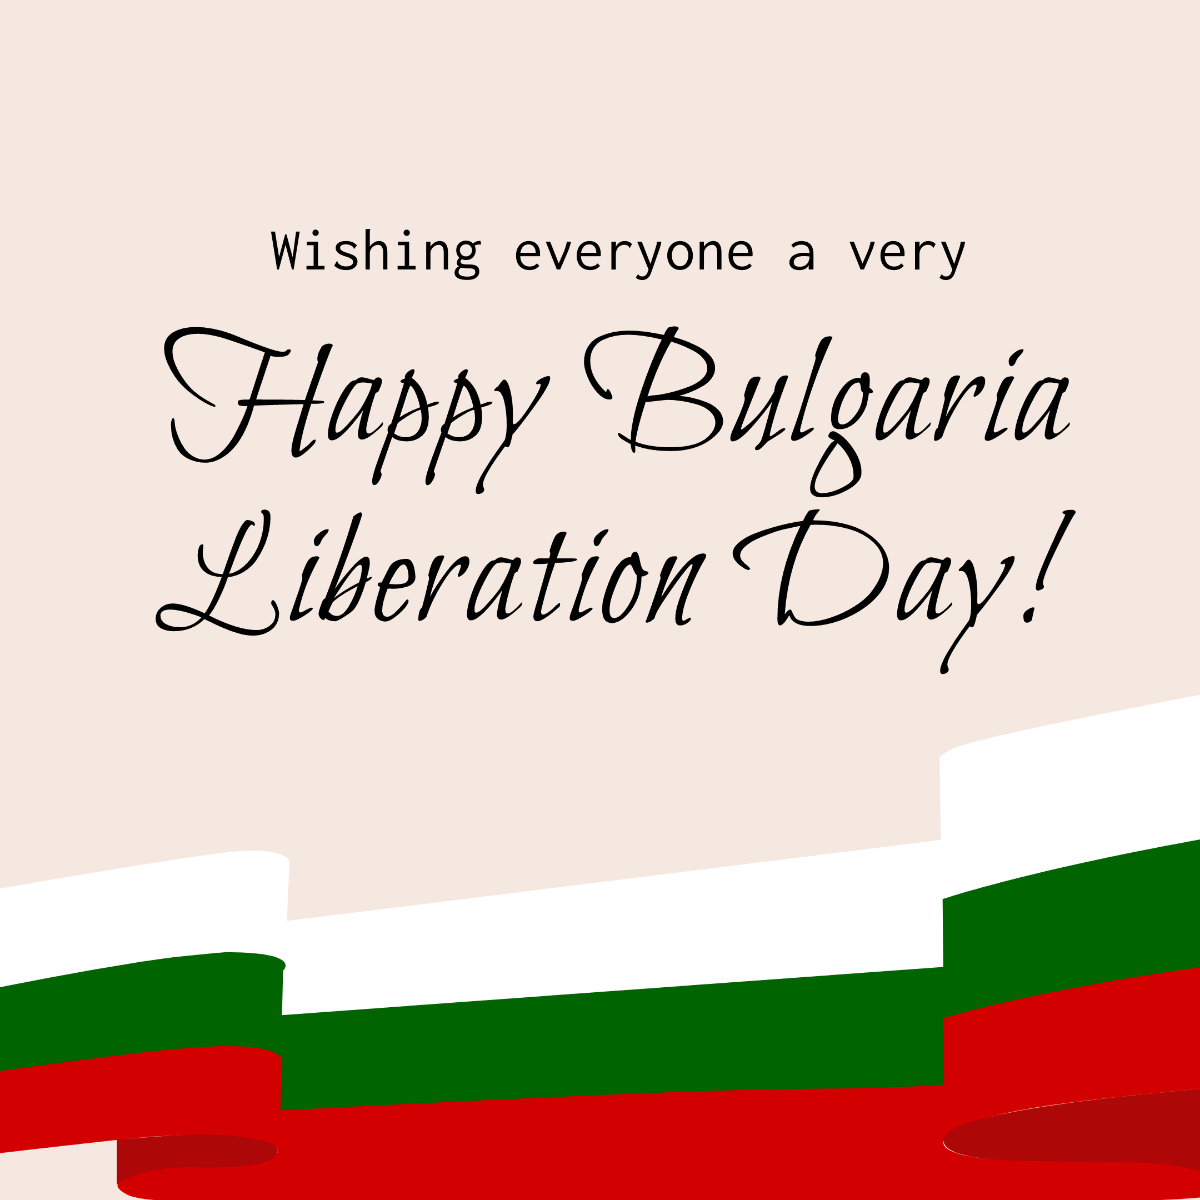 Bulgaria Liberation Day Wishes Vector Template